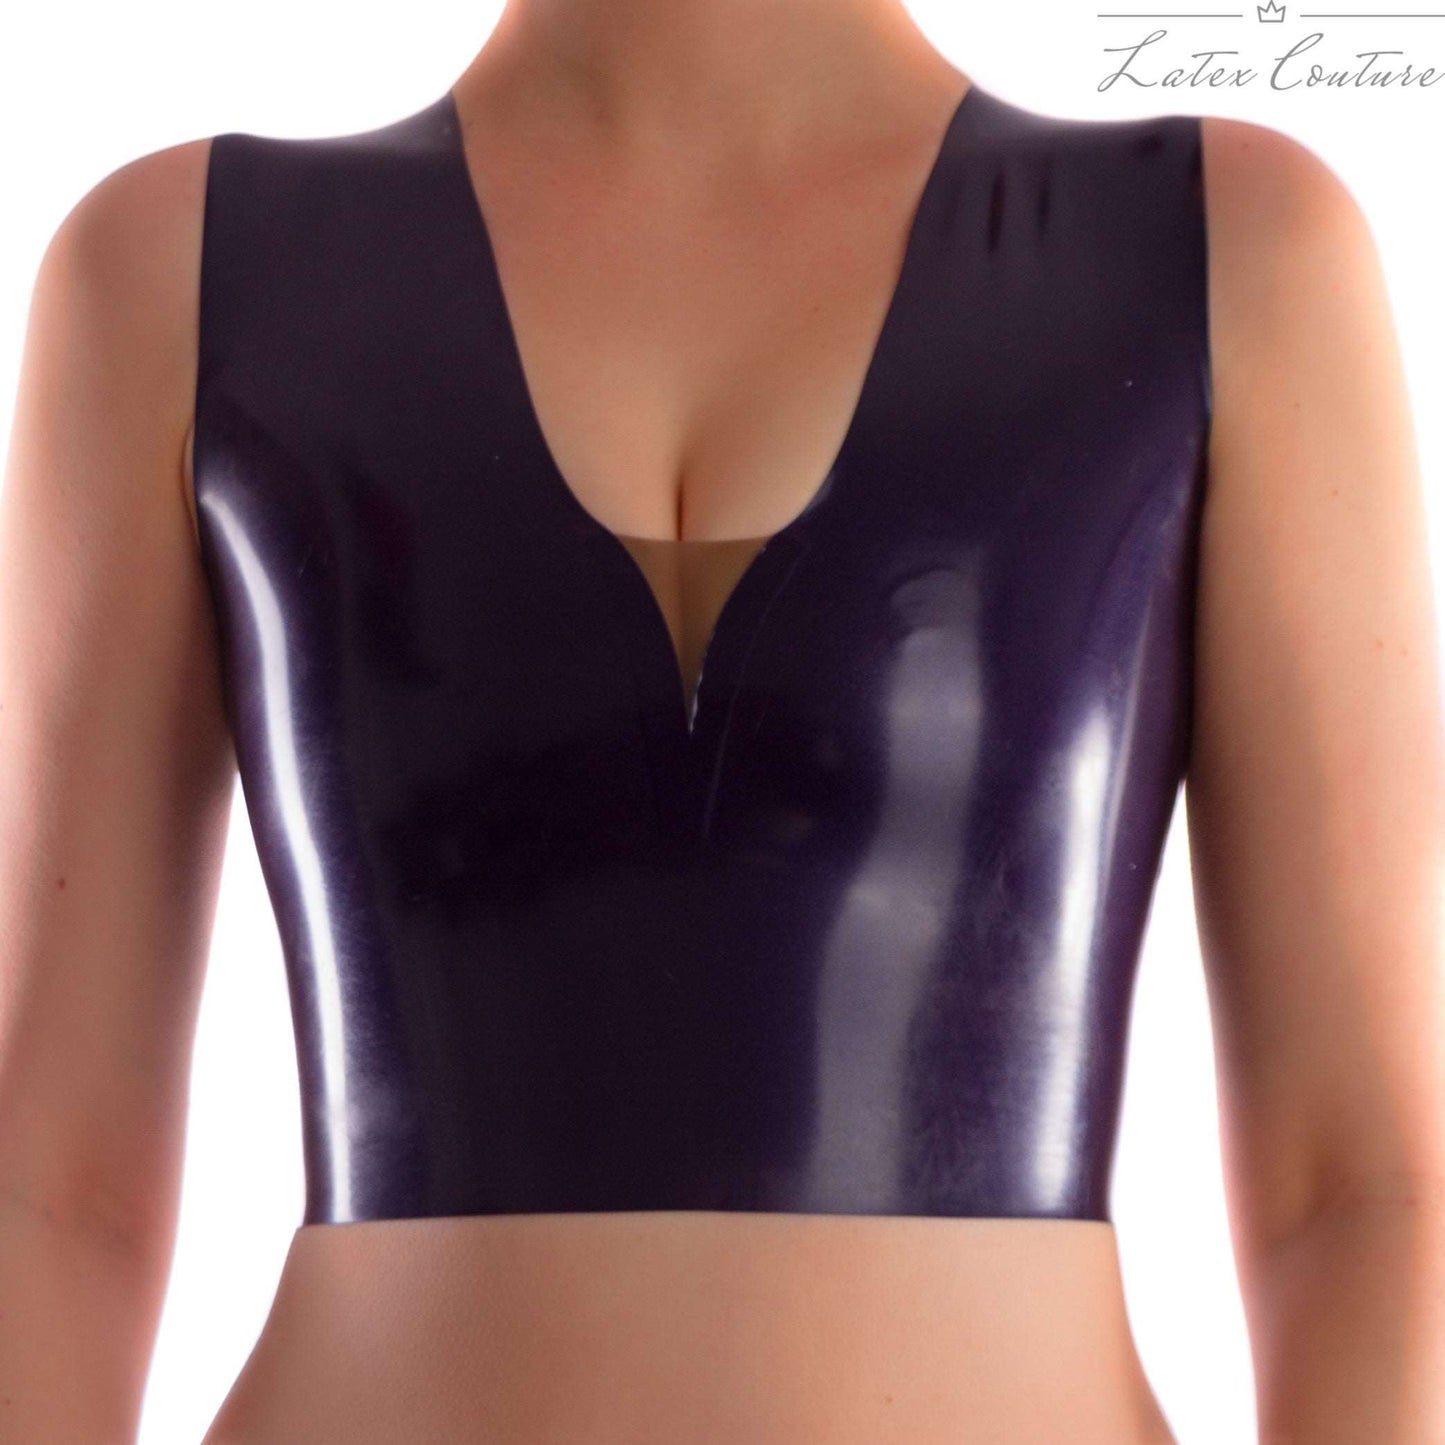 Latex Crop Top - Latex V Plunge Neck Crop Top - Latex Couture